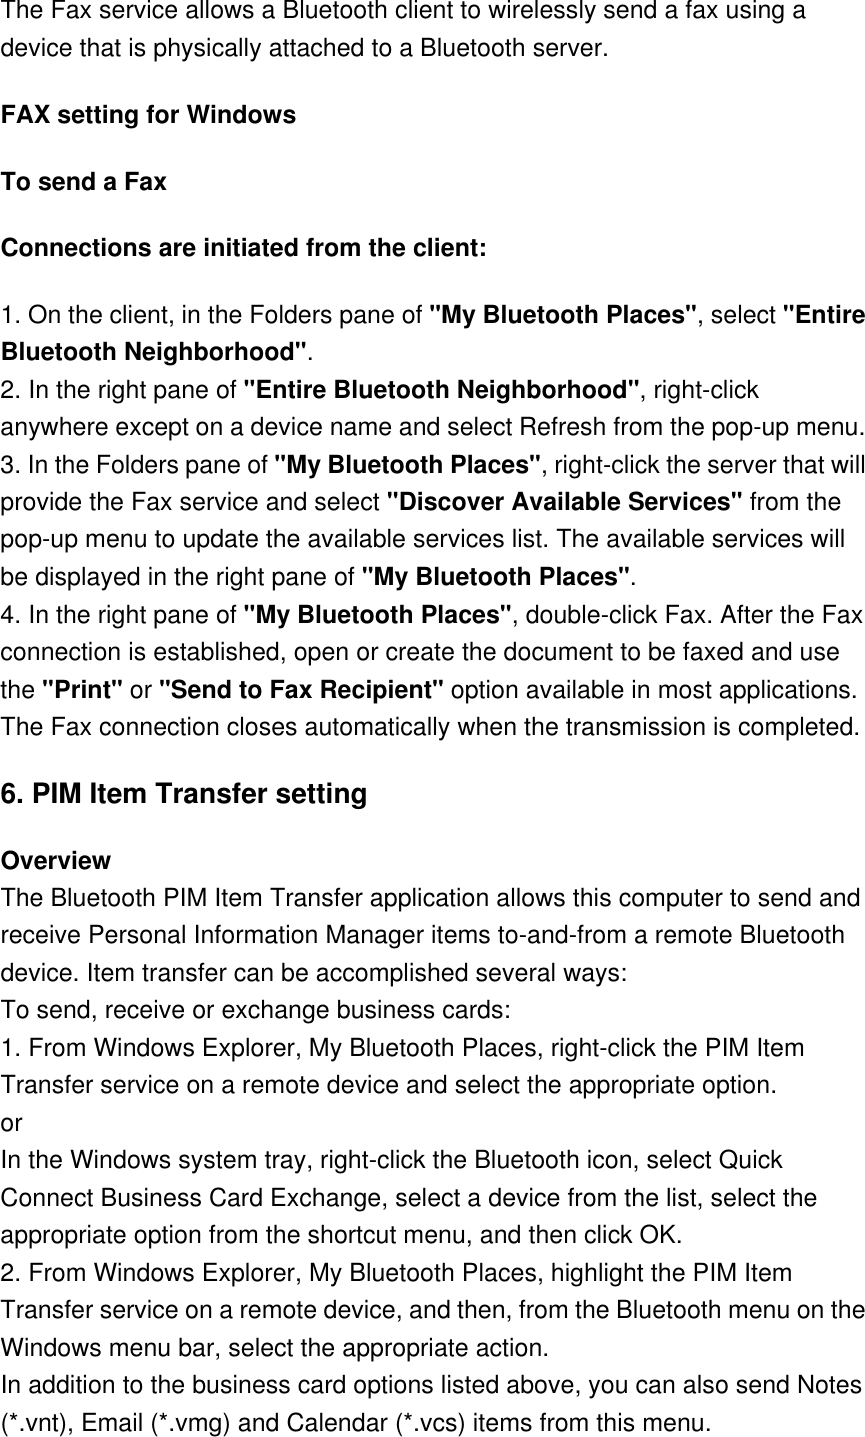 The Fax service allows a Bluetooth client to wirelessly send a fax using a device that is physically attached to a Bluetooth server. FAX setting for Windows To send a Fax Connections are initiated from the client: 1. On the client, in the Folders pane of &quot;My Bluetooth Places&quot;, select &quot;Entire Bluetooth Neighborhood&quot;. 2. In the right pane of &quot;Entire Bluetooth Neighborhood&quot;, right-click anywhere except on a device name and select Refresh from the pop-up menu. 3. In the Folders pane of &quot;My Bluetooth Places&quot;, right-click the server that will provide the Fax service and select &quot;Discover Available Services&quot; from the pop-up menu to update the available services list. The available services will be displayed in the right pane of &quot;My Bluetooth Places&quot;. 4. In the right pane of &quot;My Bluetooth Places&quot;, double-click Fax. After the Fax connection is established, open or create the document to be faxed and use the &quot;Print&quot; or &quot;Send to Fax Recipient&quot; option available in most applications. The Fax connection closes automatically when the transmission is completed. 6. PIM Item Transfer setting Overview The Bluetooth PIM Item Transfer application allows this computer to send and receive Personal Information Manager items to-and-from a remote Bluetooth device. Item transfer can be accomplished several ways: To send, receive or exchange business cards: 1. From Windows Explorer, My Bluetooth Places, right-click the PIM Item Transfer service on a remote device and select the appropriate option. or  In the Windows system tray, right-click the Bluetooth icon, select Quick Connect Business Card Exchange, select a device from the list, select the appropriate option from the shortcut menu, and then click OK. 2. From Windows Explorer, My Bluetooth Places, highlight the PIM Item Transfer service on a remote device, and then, from the Bluetooth menu on the Windows menu bar, select the appropriate action. In addition to the business card options listed above, you can also send Notes (*.vnt), Email (*.vmg) and Calendar (*.vcs) items from this menu. 